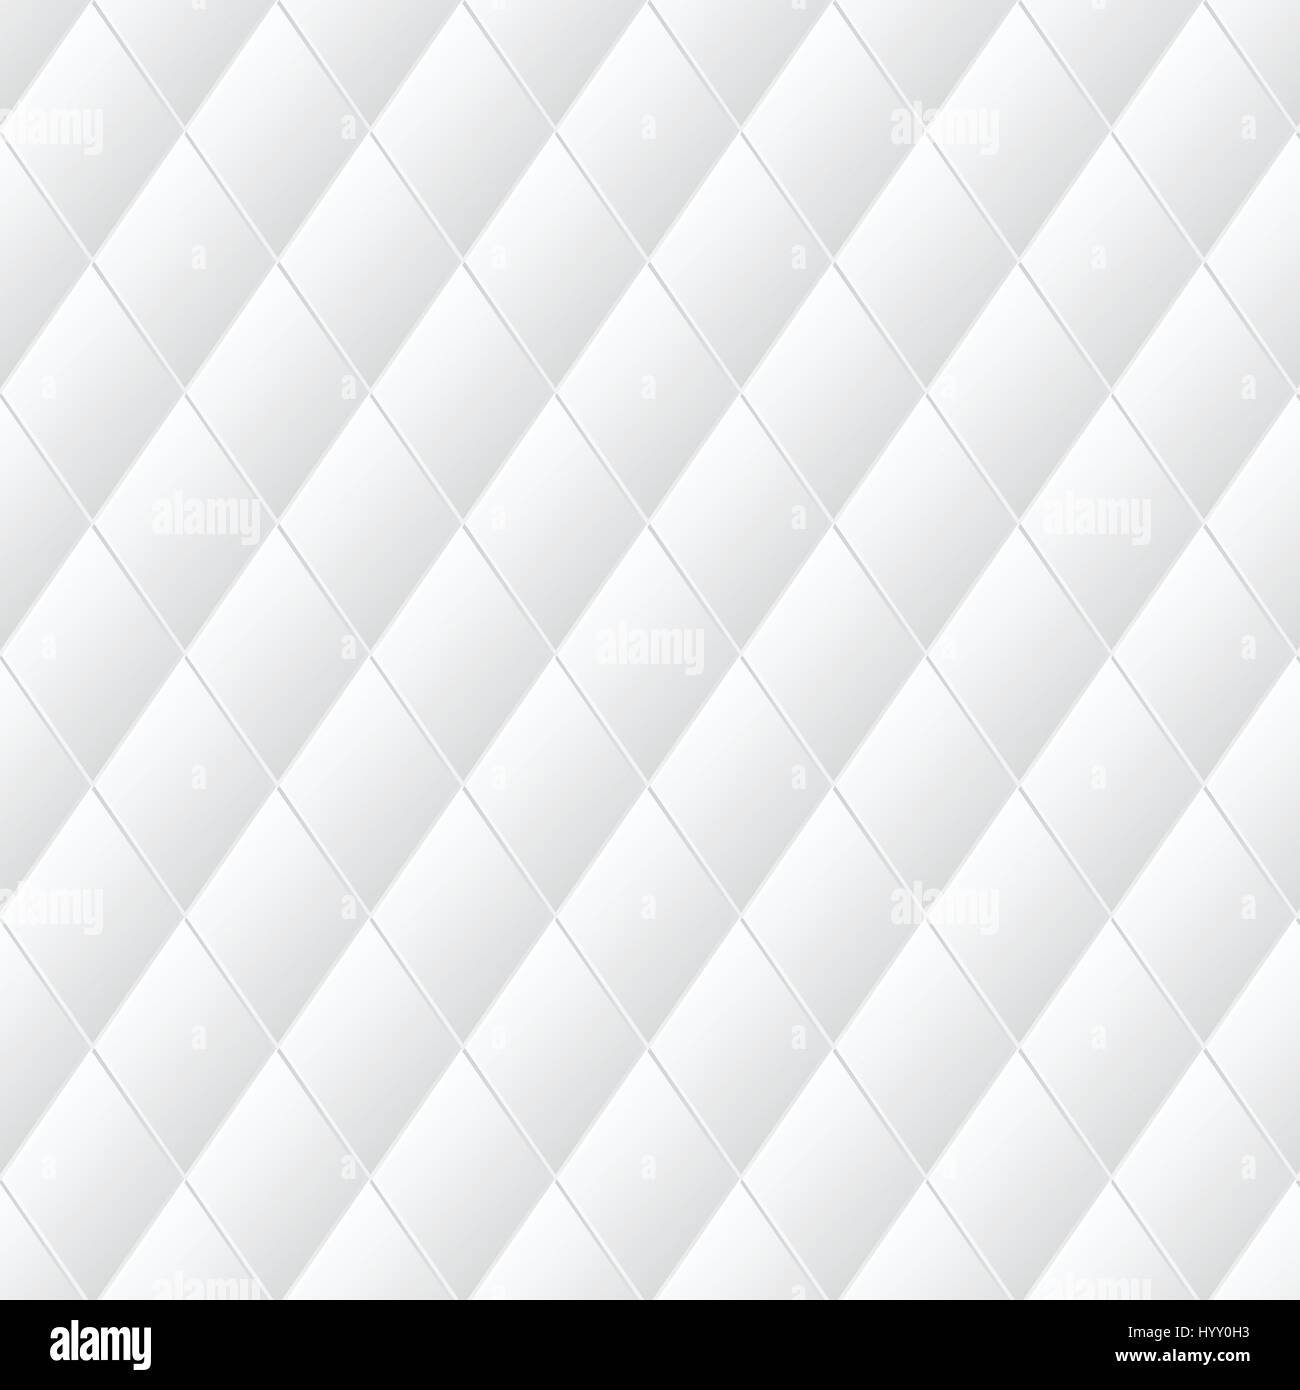 White and gray pattern background vector illustration Stock Vector